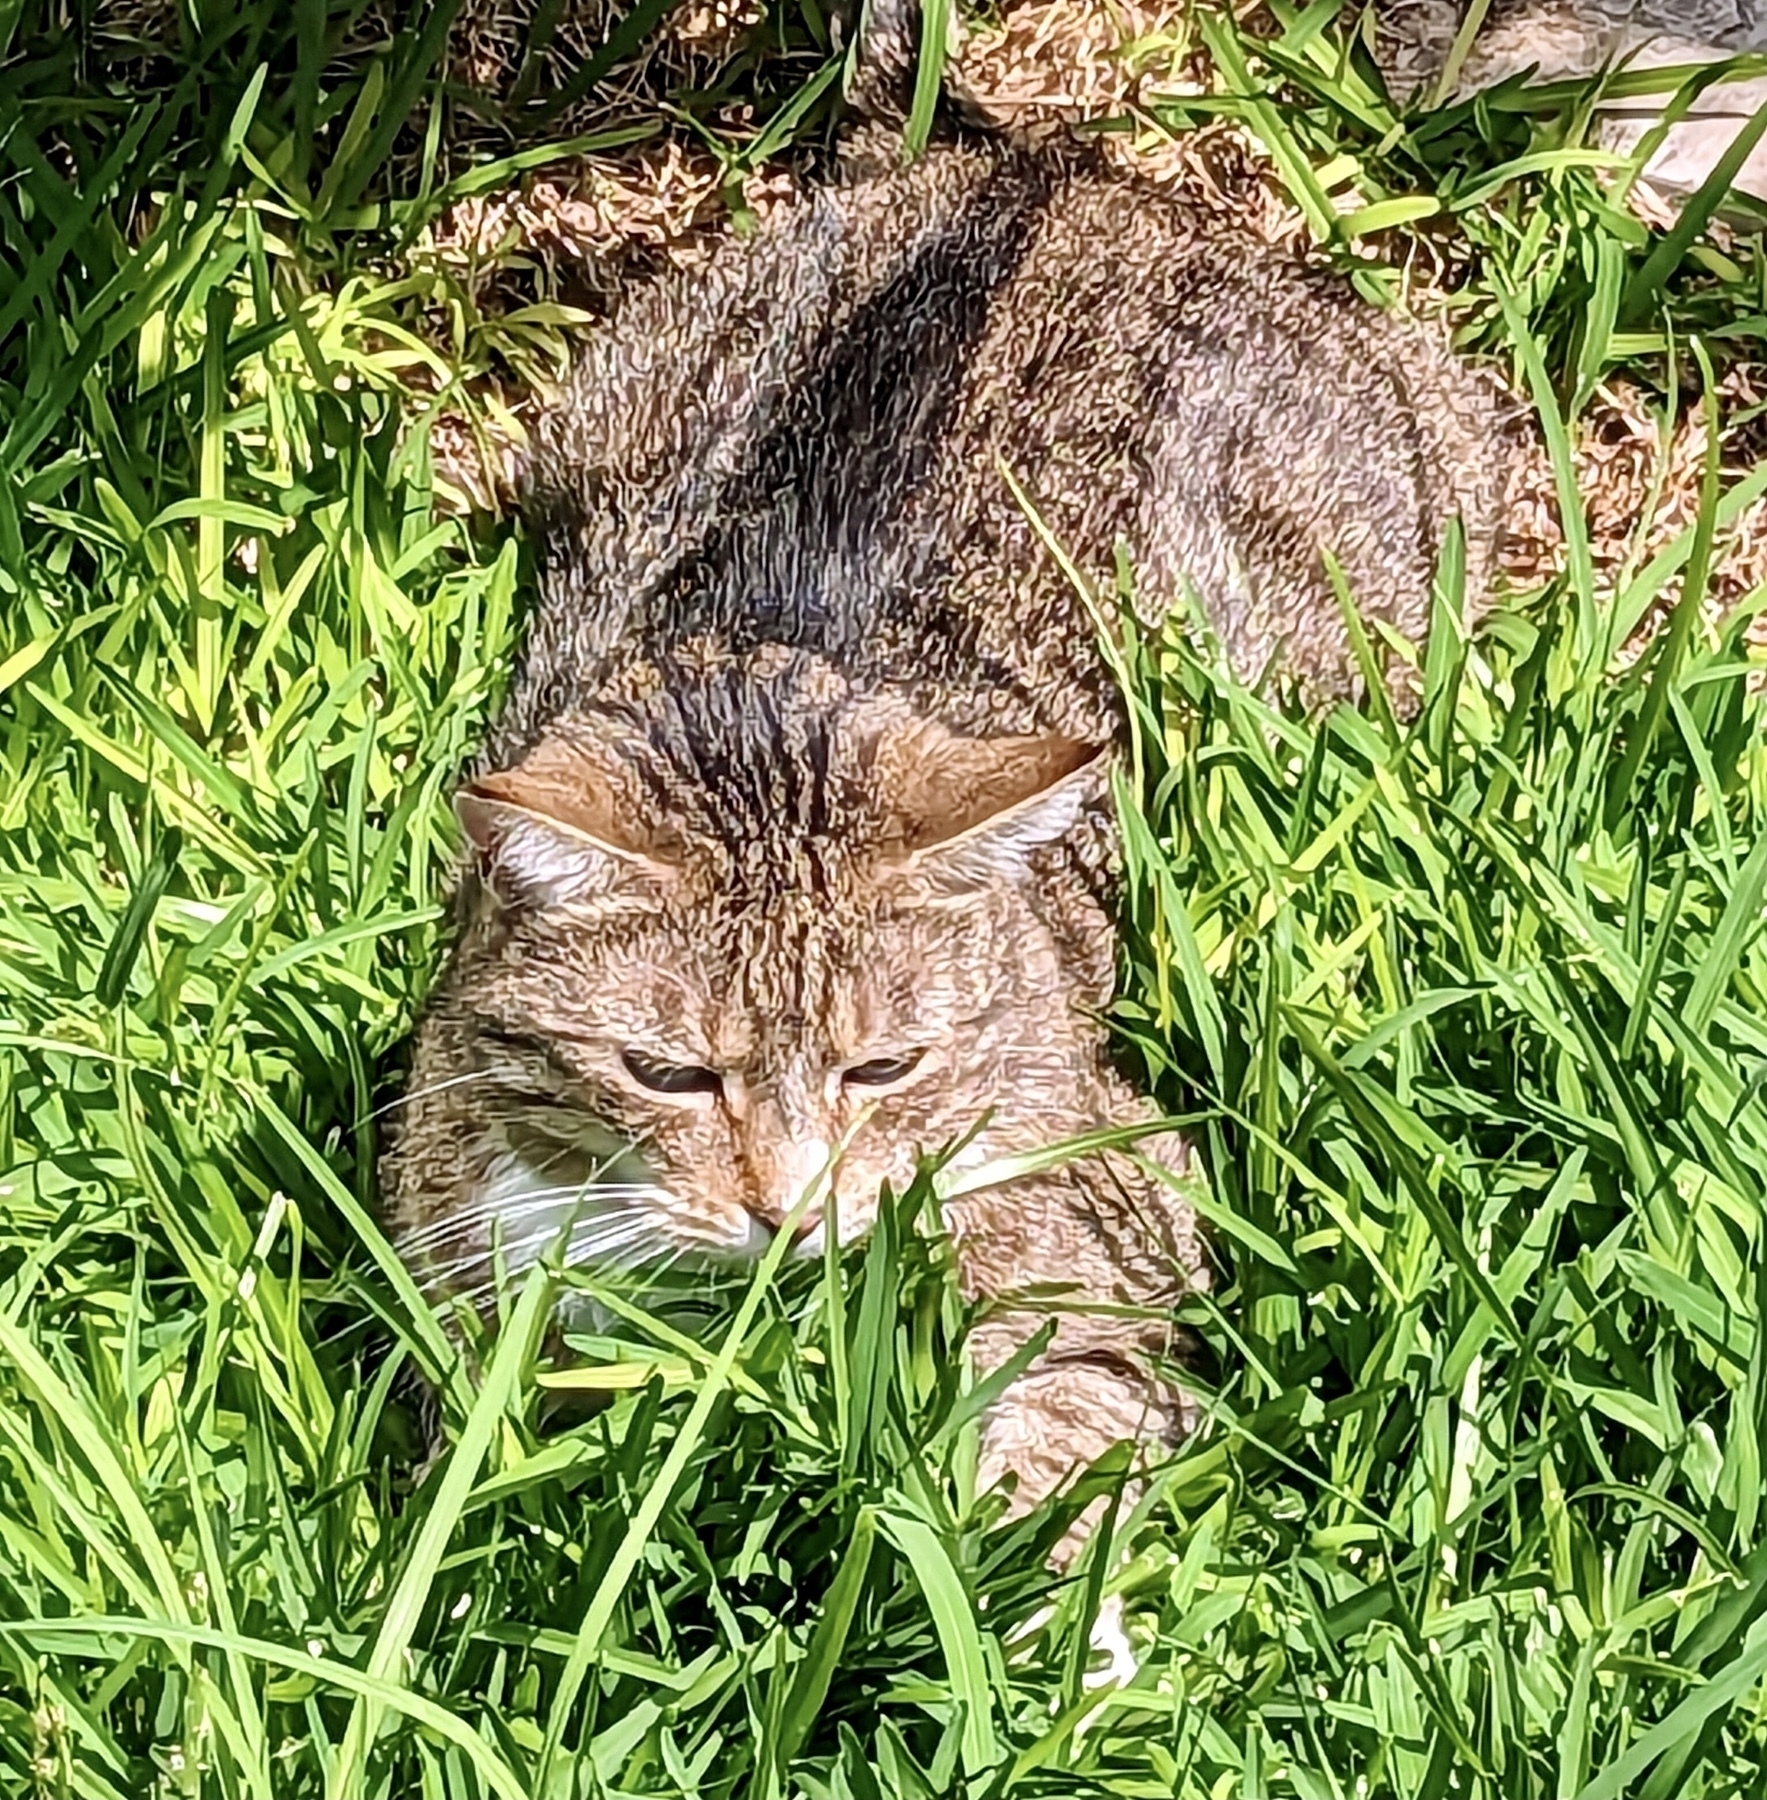 My abby cat lies in wait in the long grass. Its pose is a bit like that of the Sphynx.